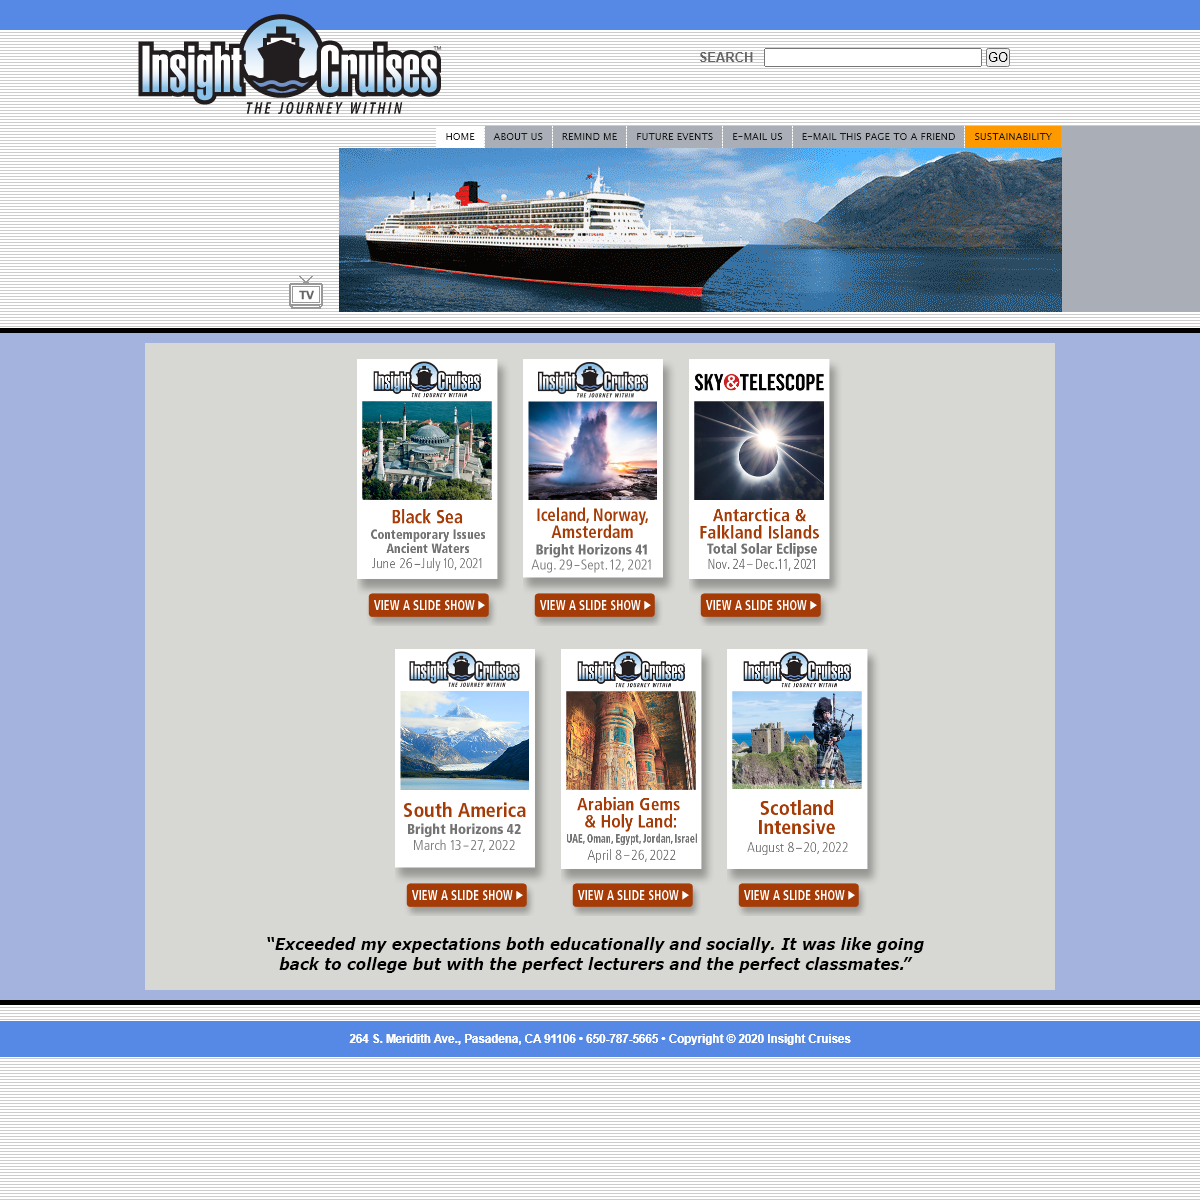 A complete backup of geekcruises.com